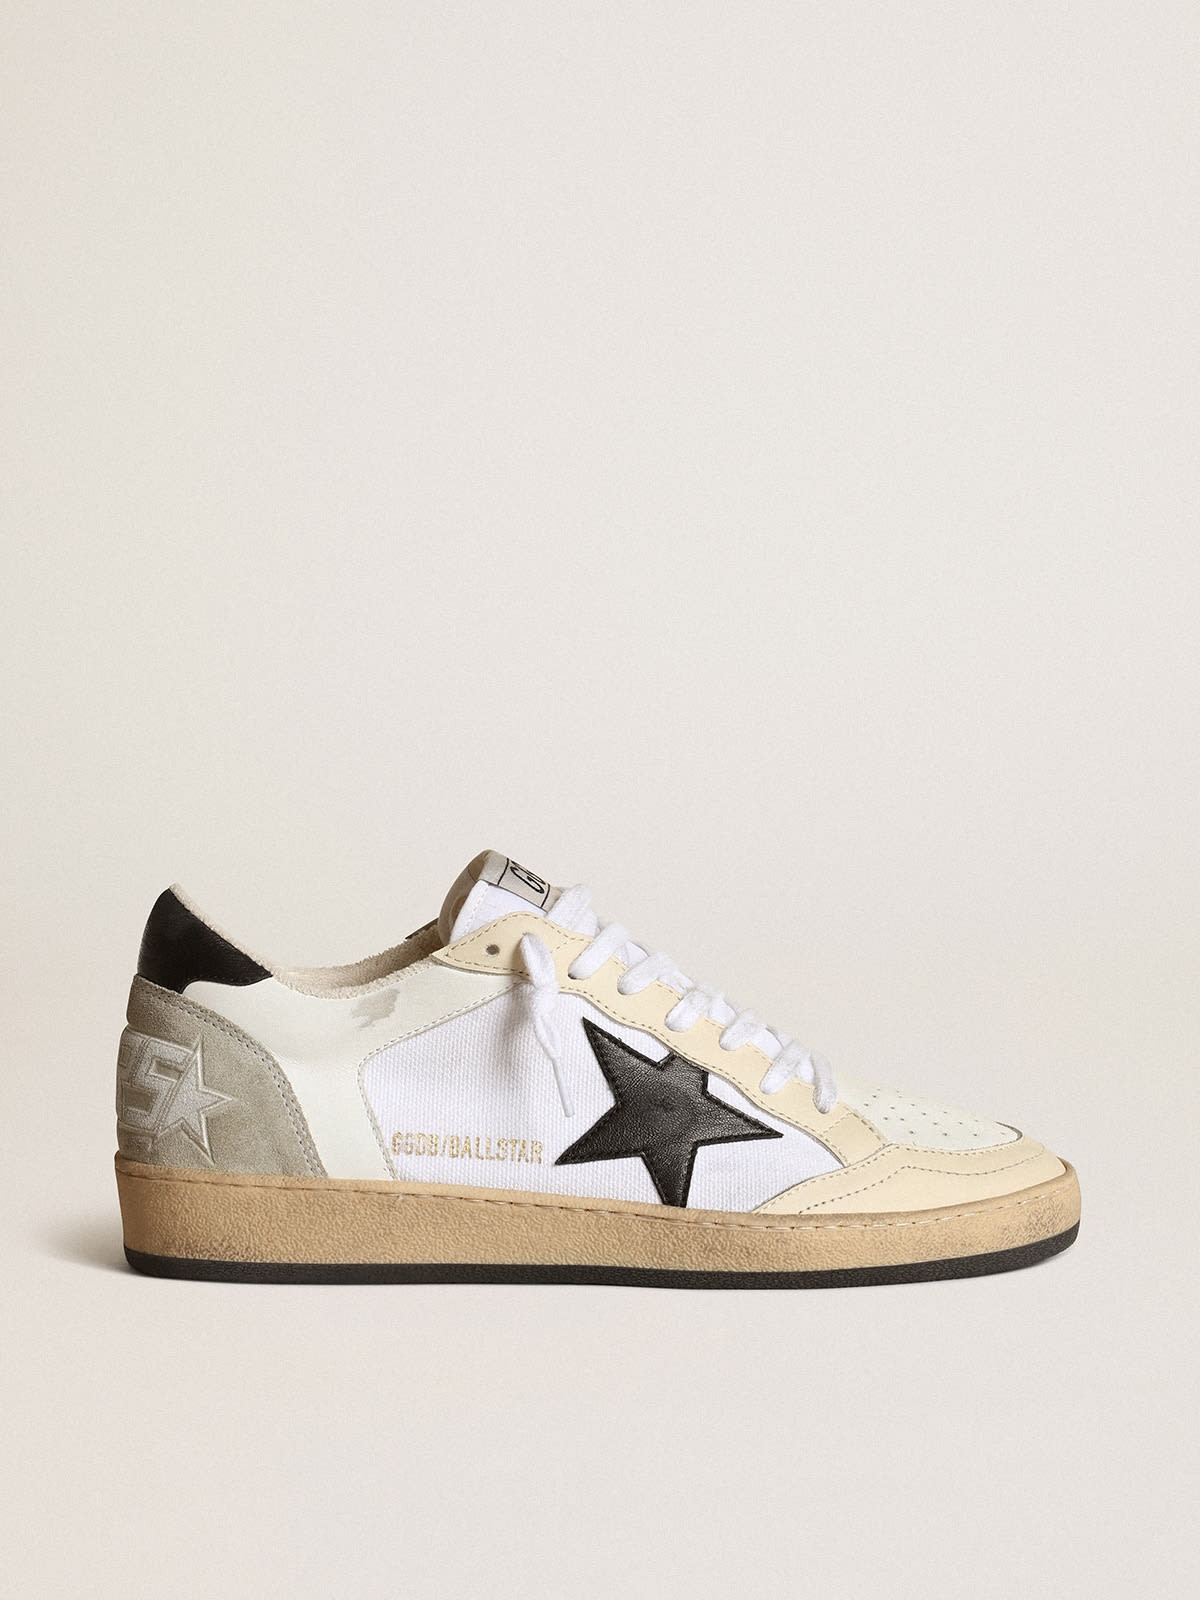 Women’s Ball Star sneakers in white canvas and leather with ivory leather inserts and black nappa le - 1